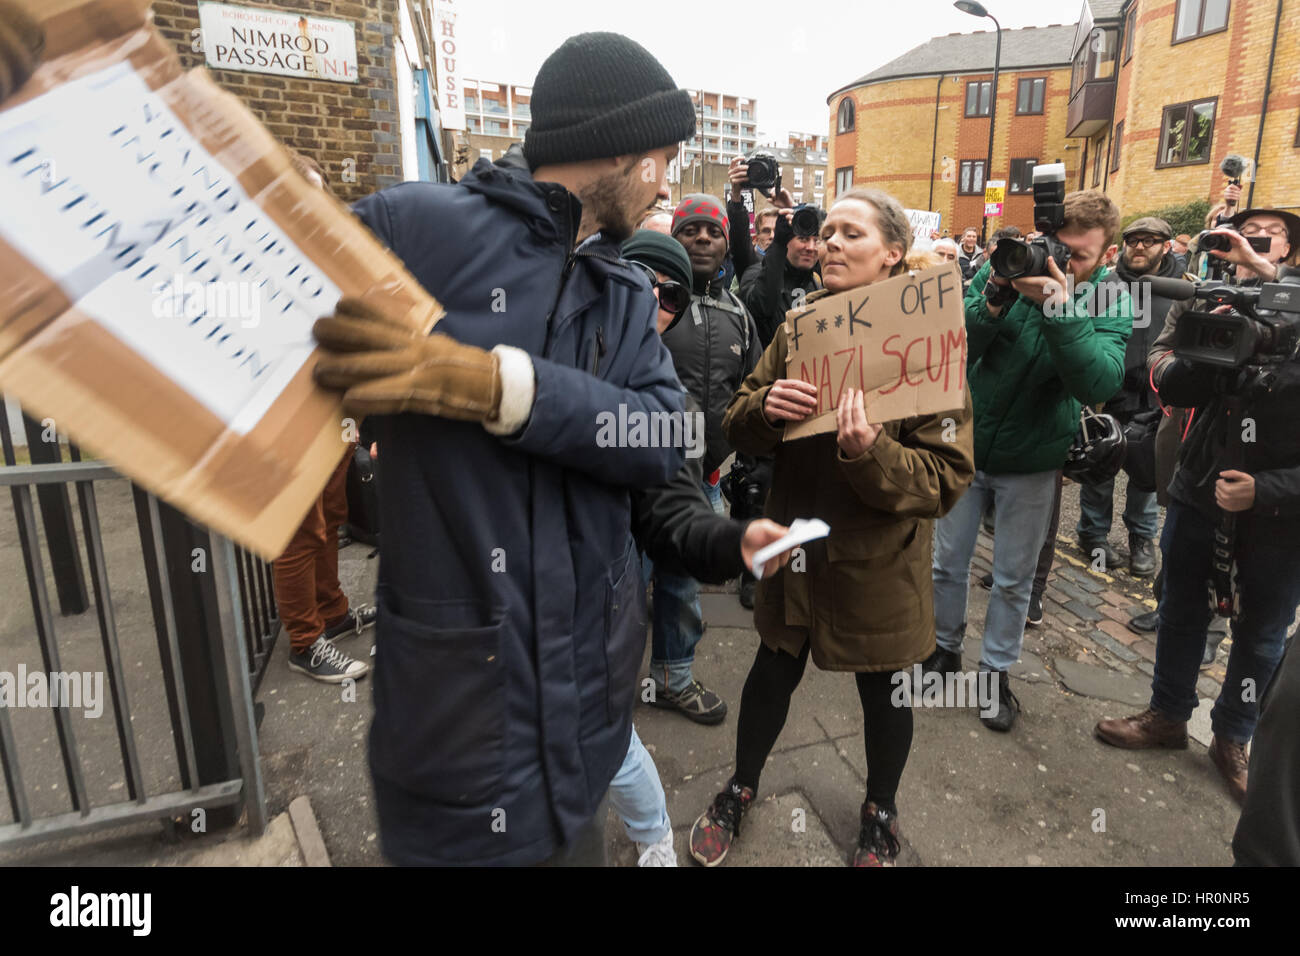 London, UK. 25th February 2017.  Protesters argue with a man outside the LD50  gallery in Dalston who says he has come to defend that the right to freely discuss ideas, even repulsive ones. He was shouted at by protesters and eventually police took him aside and advised him to leave. Several hundred people from East London had gathered outside the  gallery which they say has promoted fascists, neo-Nazis, misogynists, racists and Islamophobes in one of London's more diverse areas. Credit: Peter Marshall/Alamy Live News Stock Photo